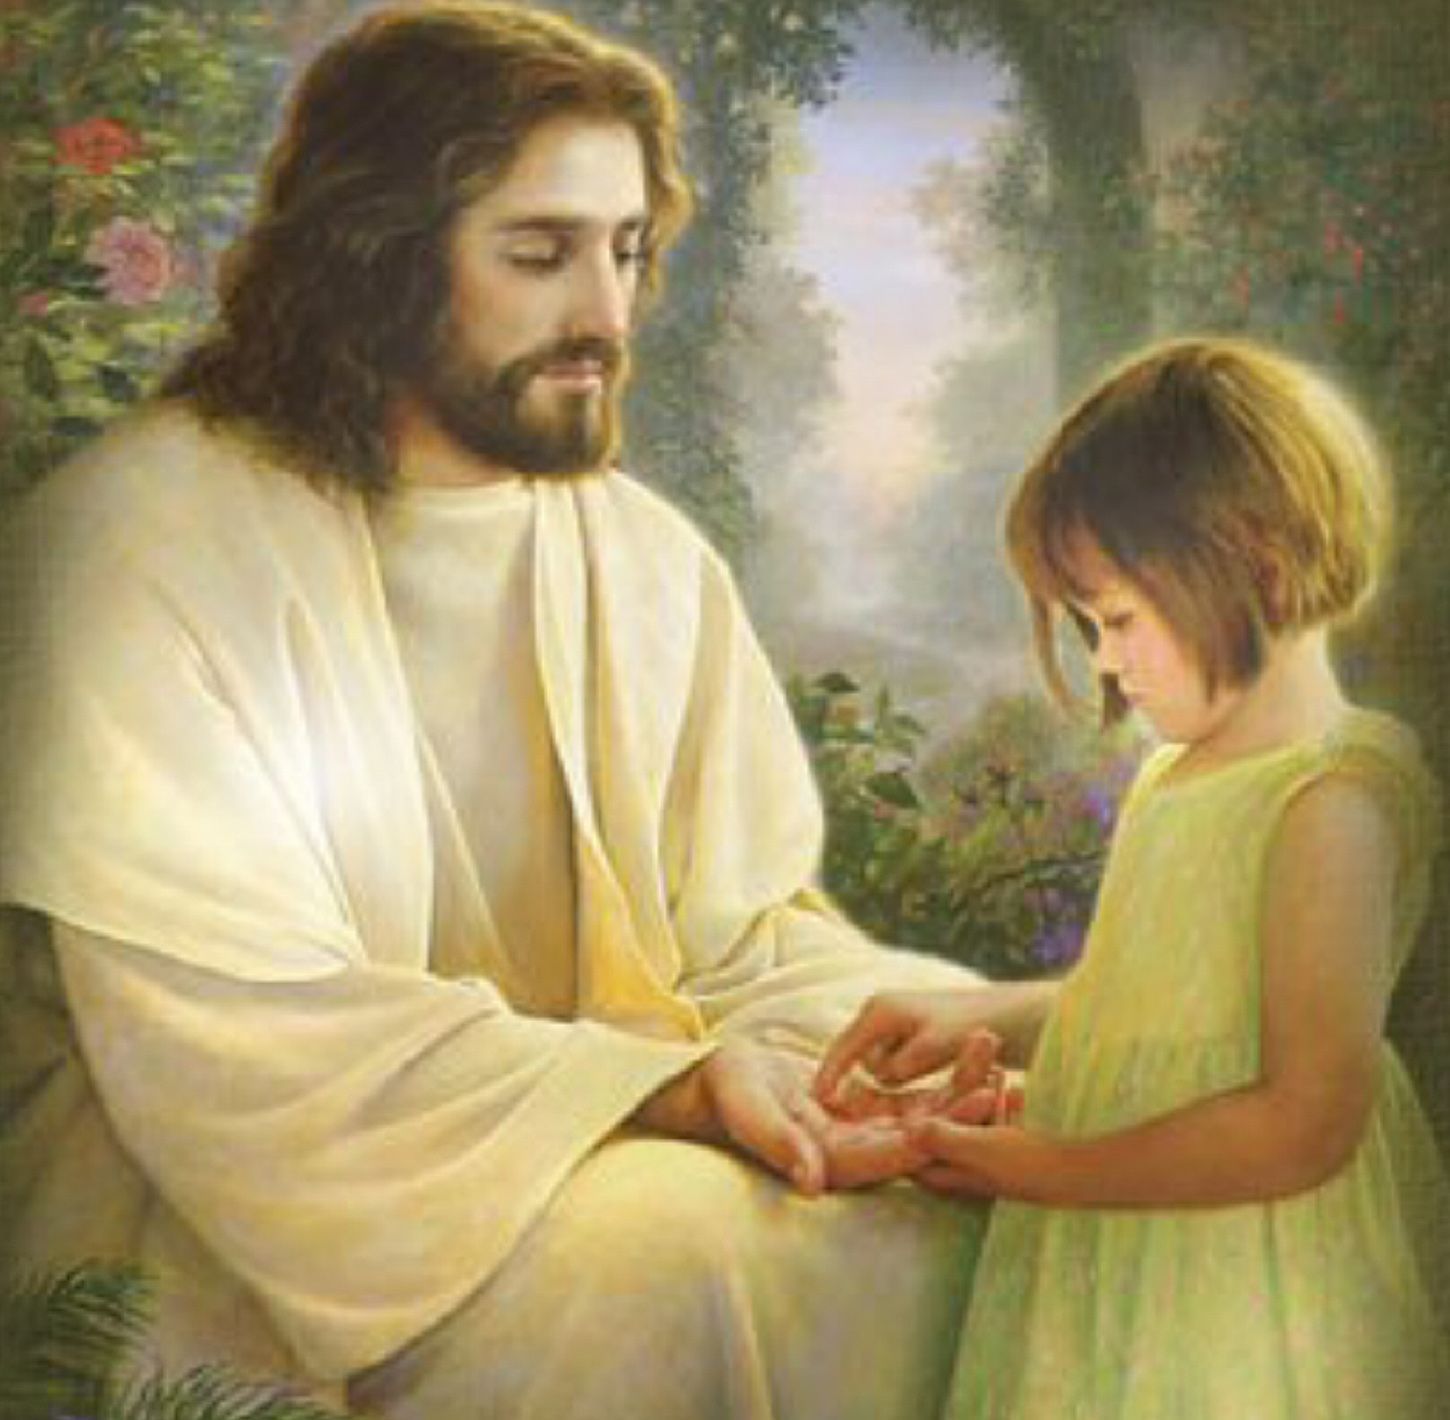 Jesus Picture Loving A Little Girl Playing With His (1450×1420). Jesus Photo, Jesus Picture, Jesus Image